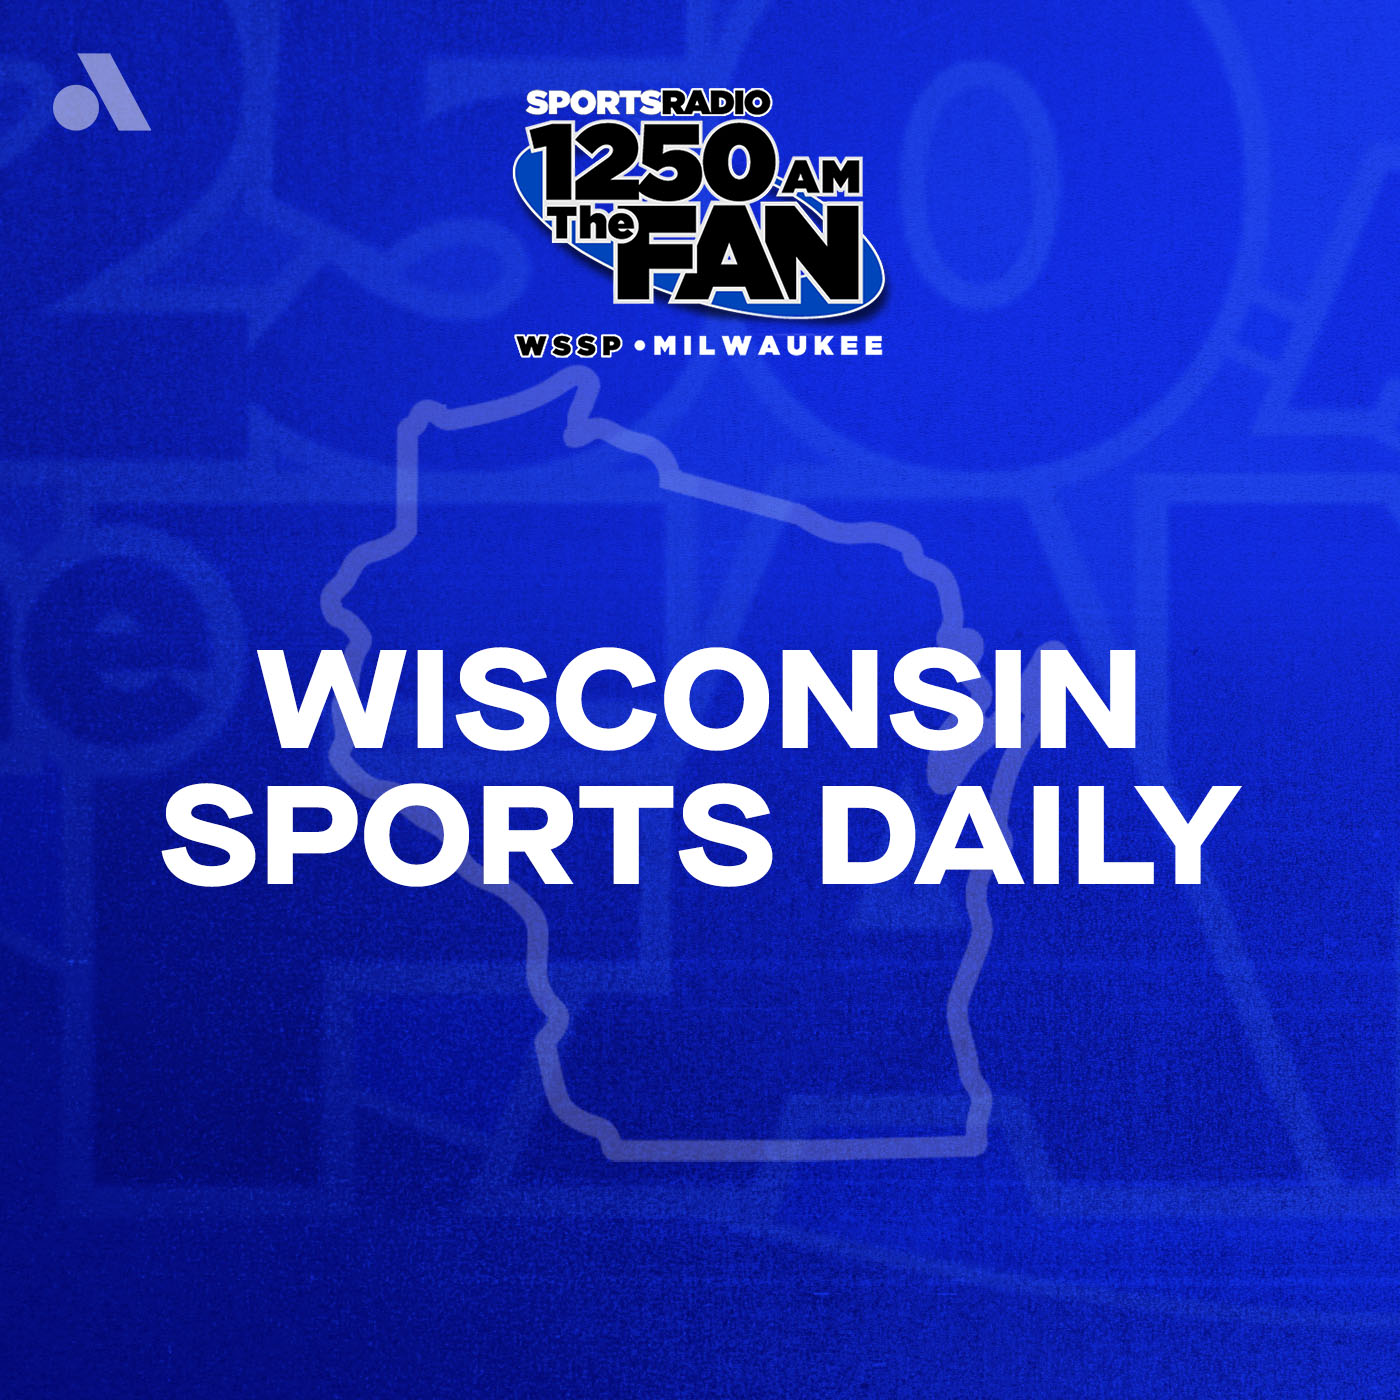 Monday, April 15th: 1st Hour Of Wisconsin Sports Daily - Trade Lillard? - Eric Nehm